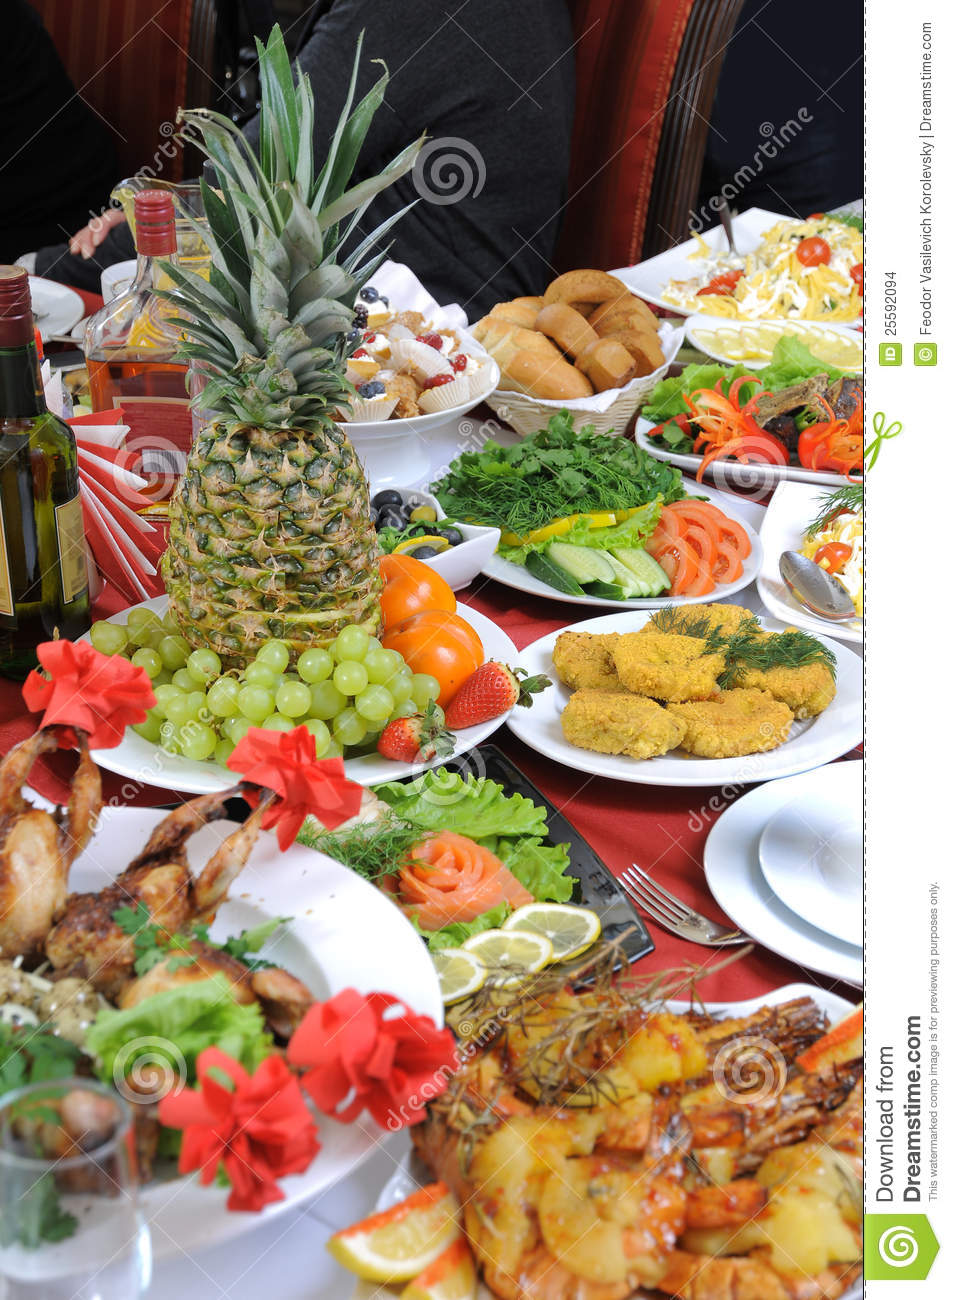 On A Table There Is A Lot Of Food  Stock Images   Image  25592094